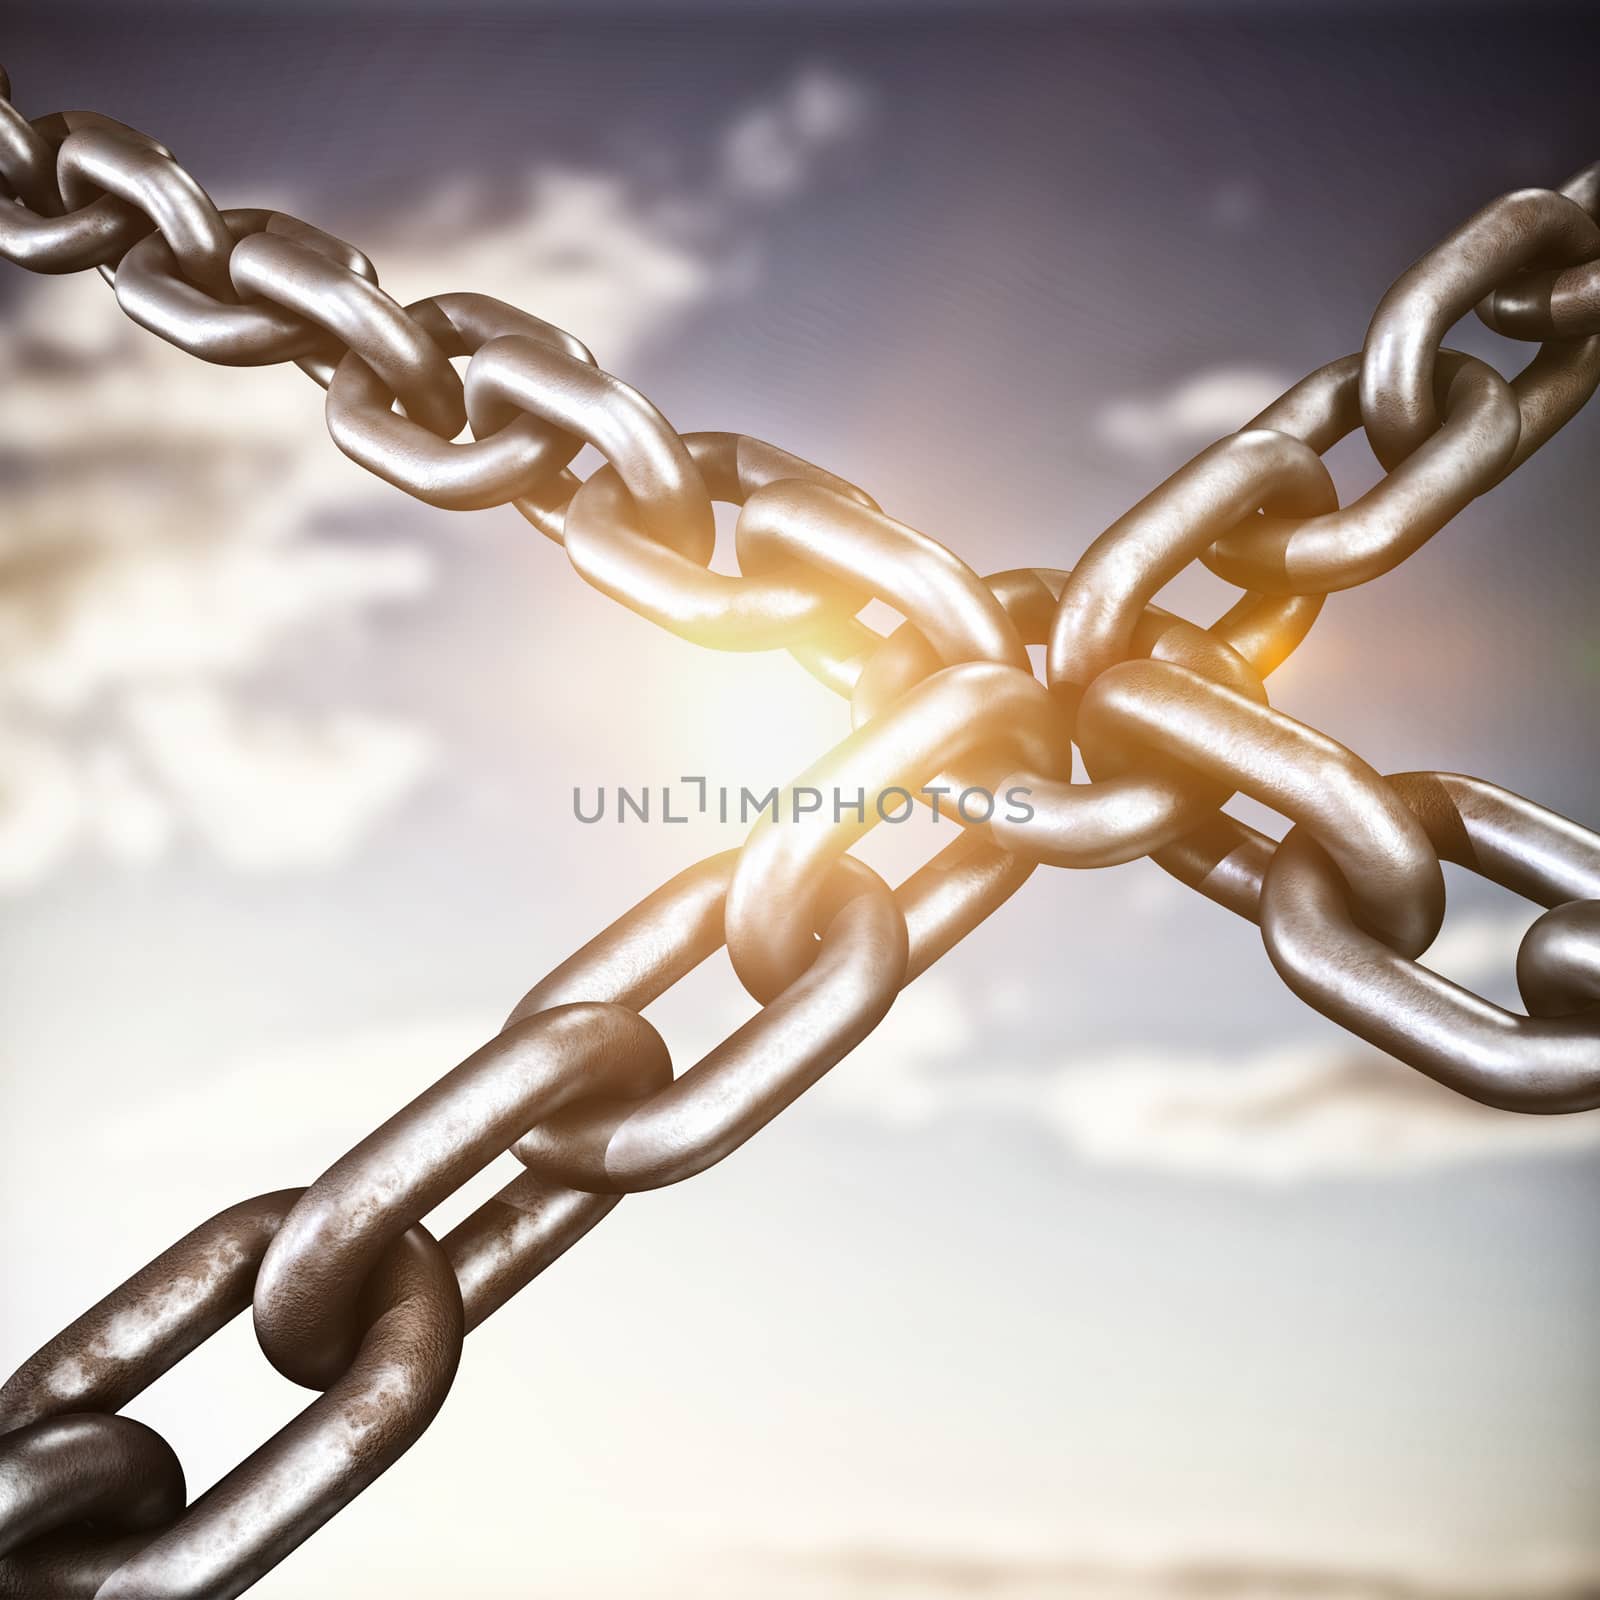 Composite image of closeup 3d image of metallic chains in cross shape by Wavebreakmedia